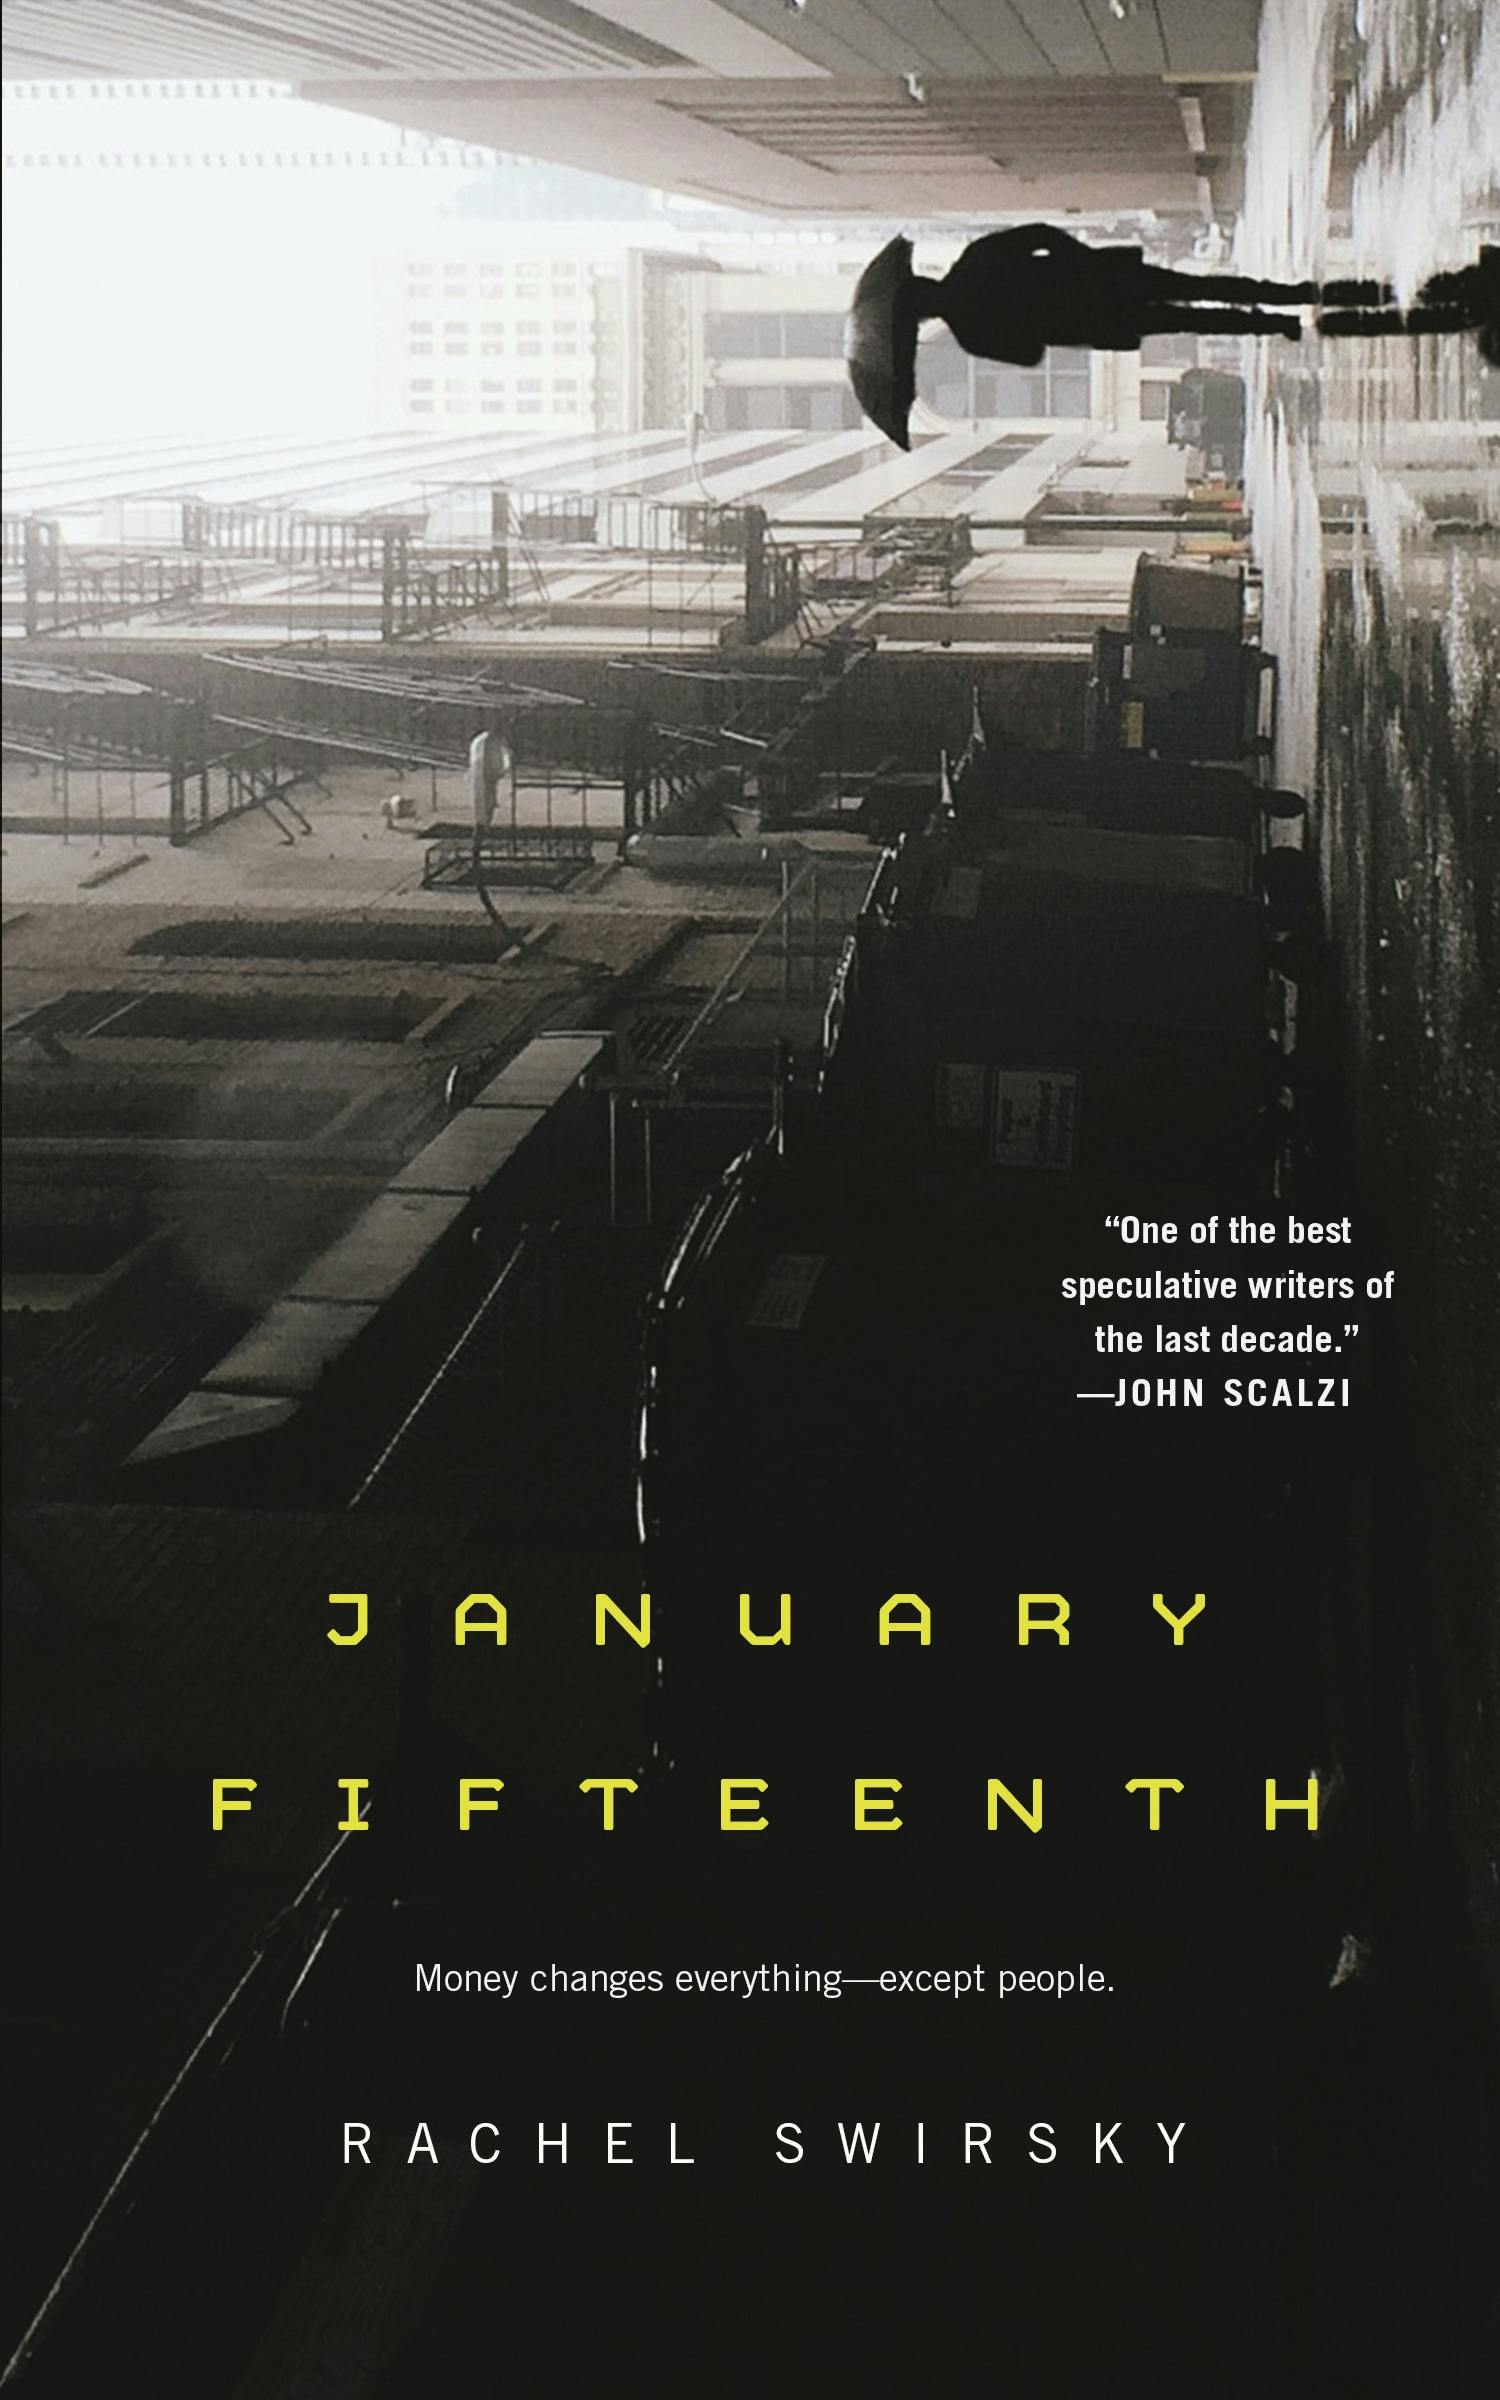 Cover for the book titled as: January Fifteenth